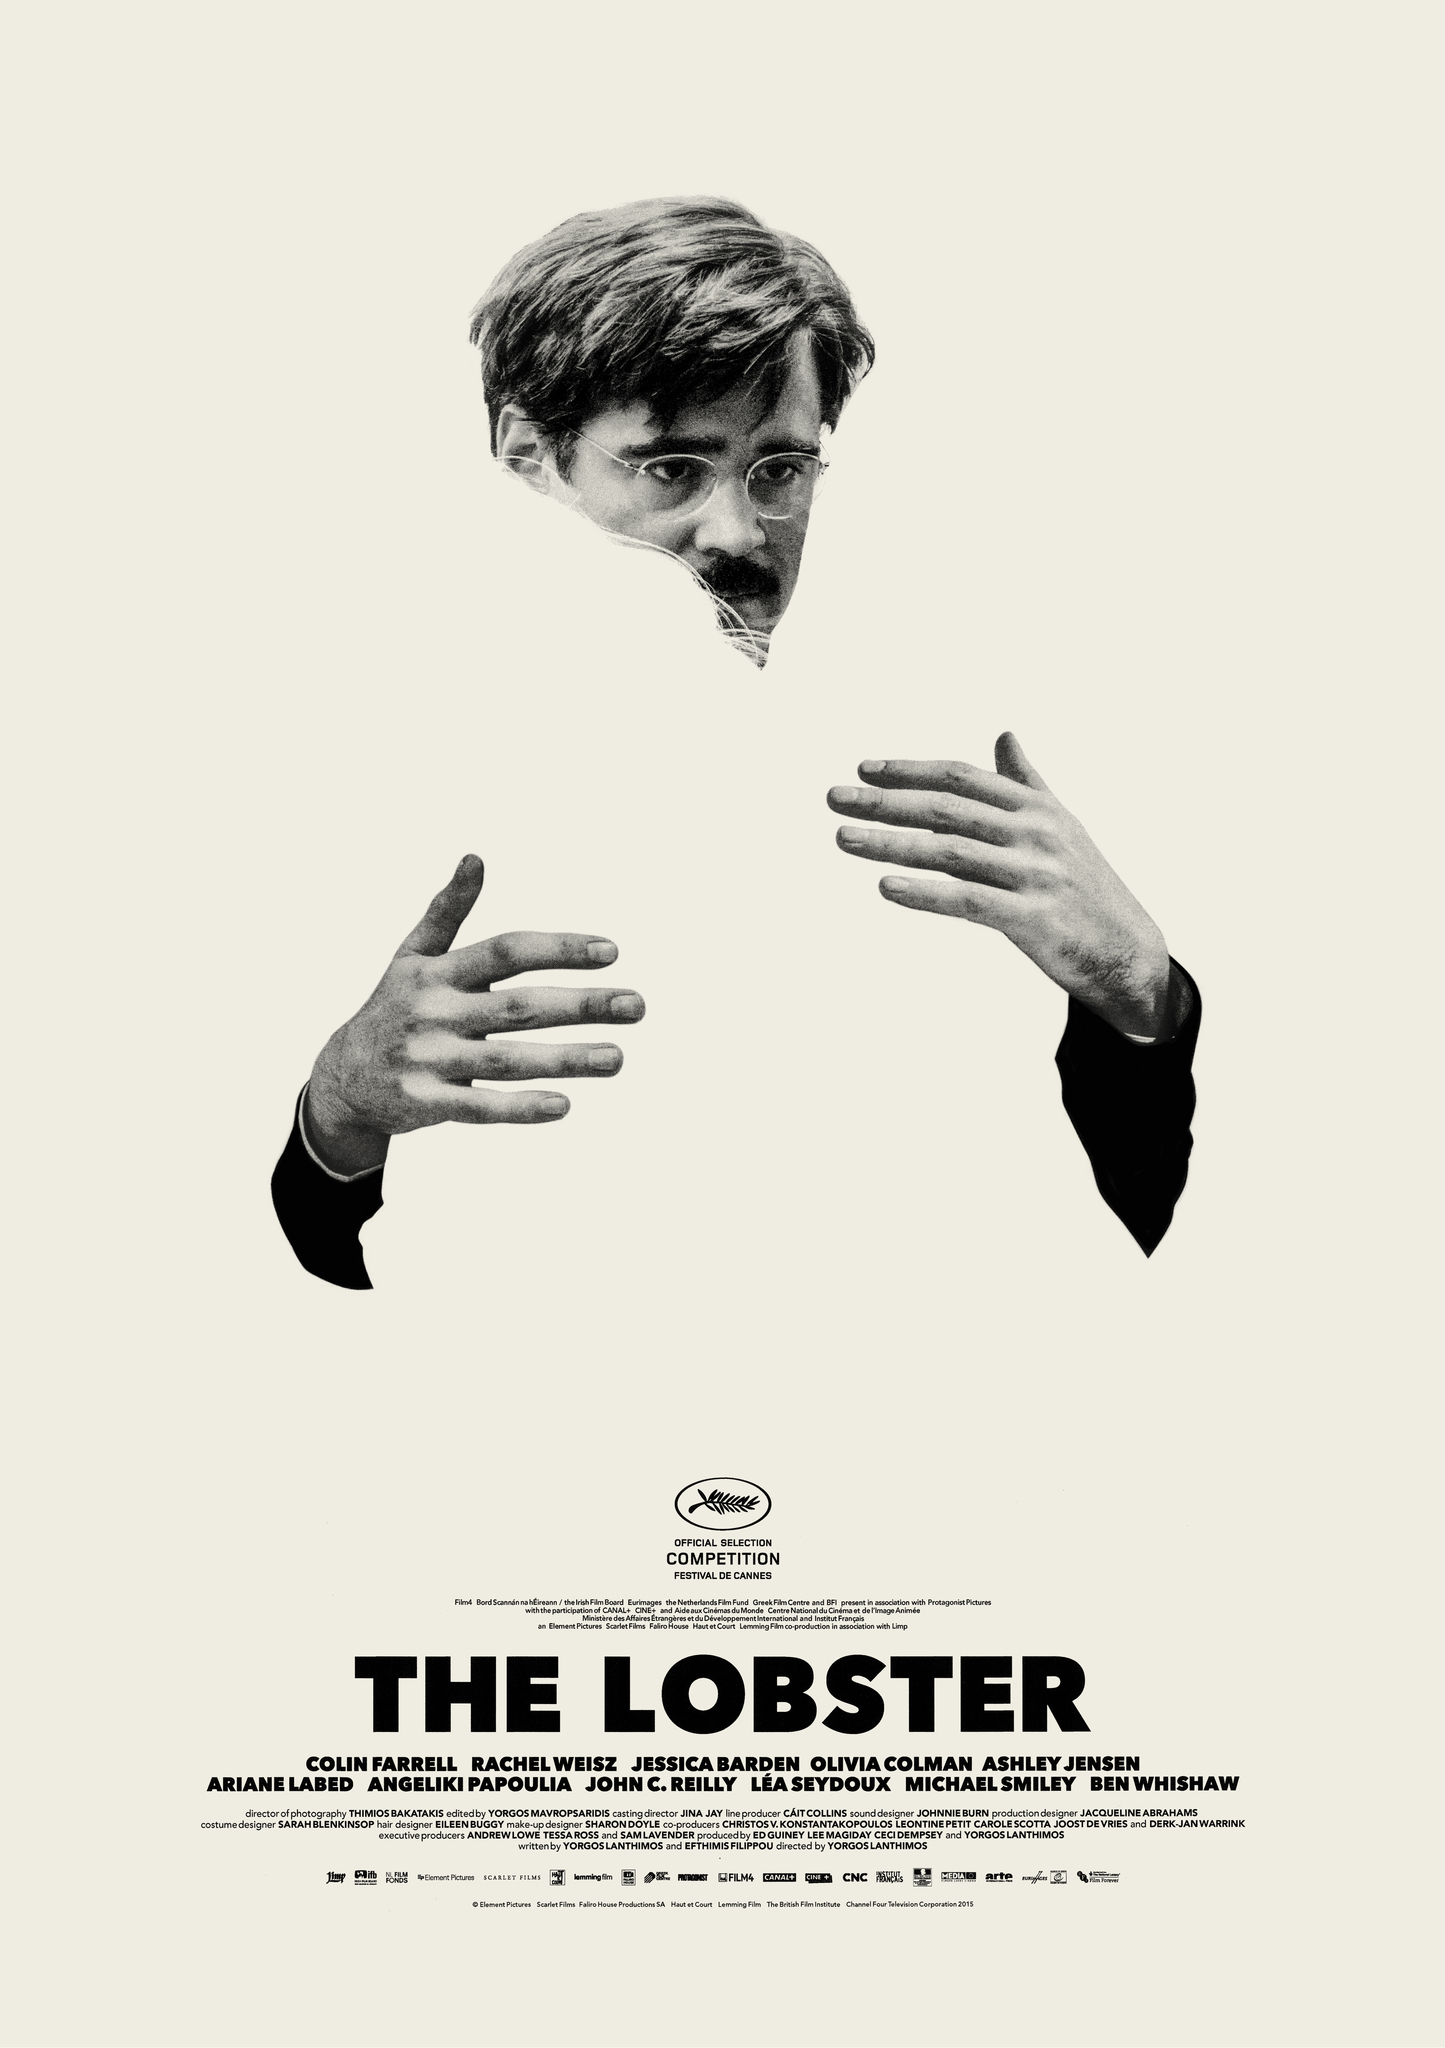 The poster for the movie 'The Lobster', showing a disembodied face and hands in a hug, as though the person being hugged has been airbrushed out